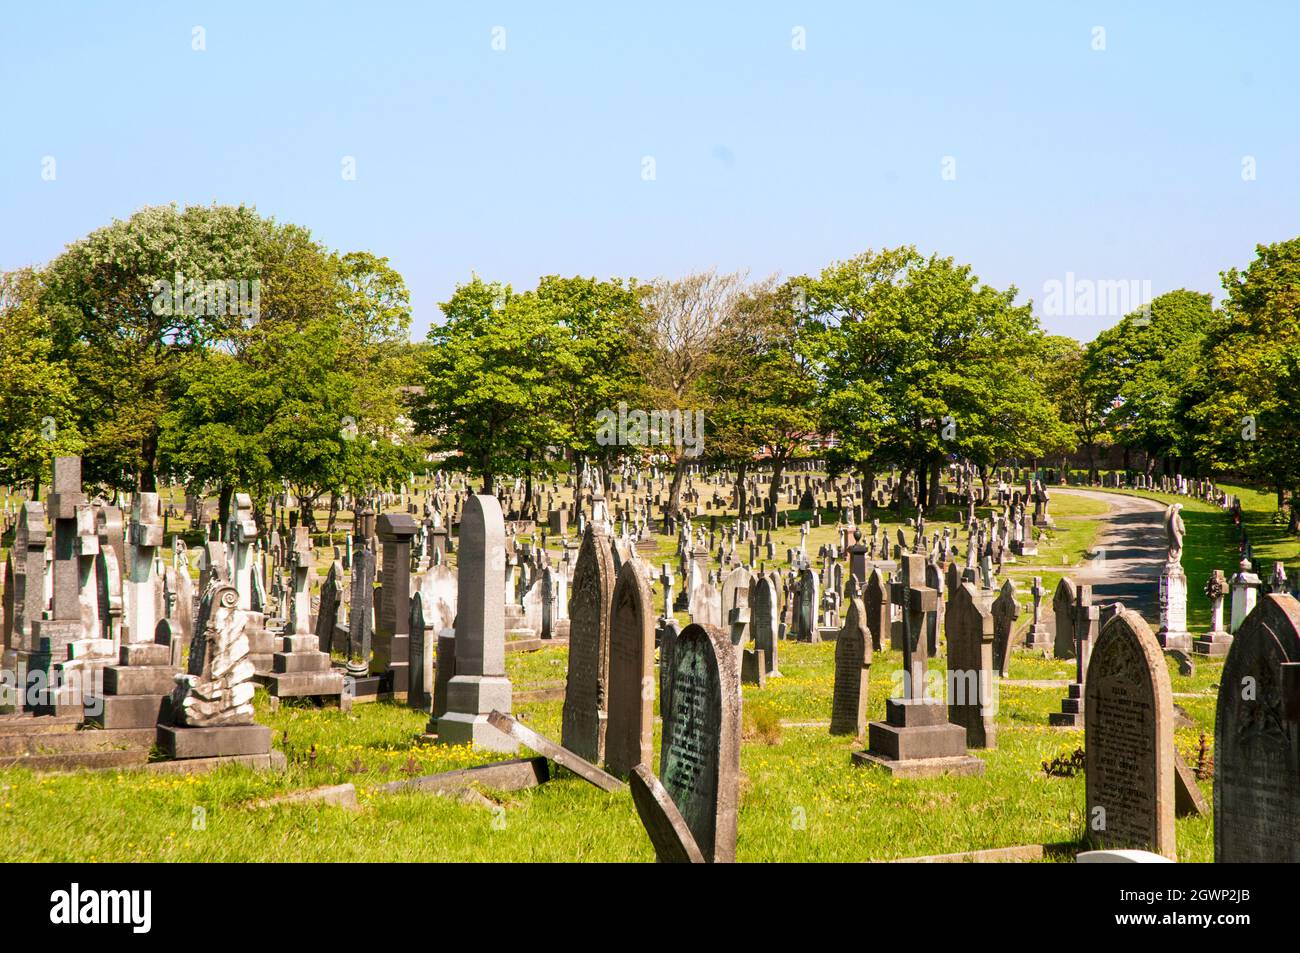 View of old gravestones in large cemetery in Layton Blackpool Lancashire England United Kingdom UK Stock Photo